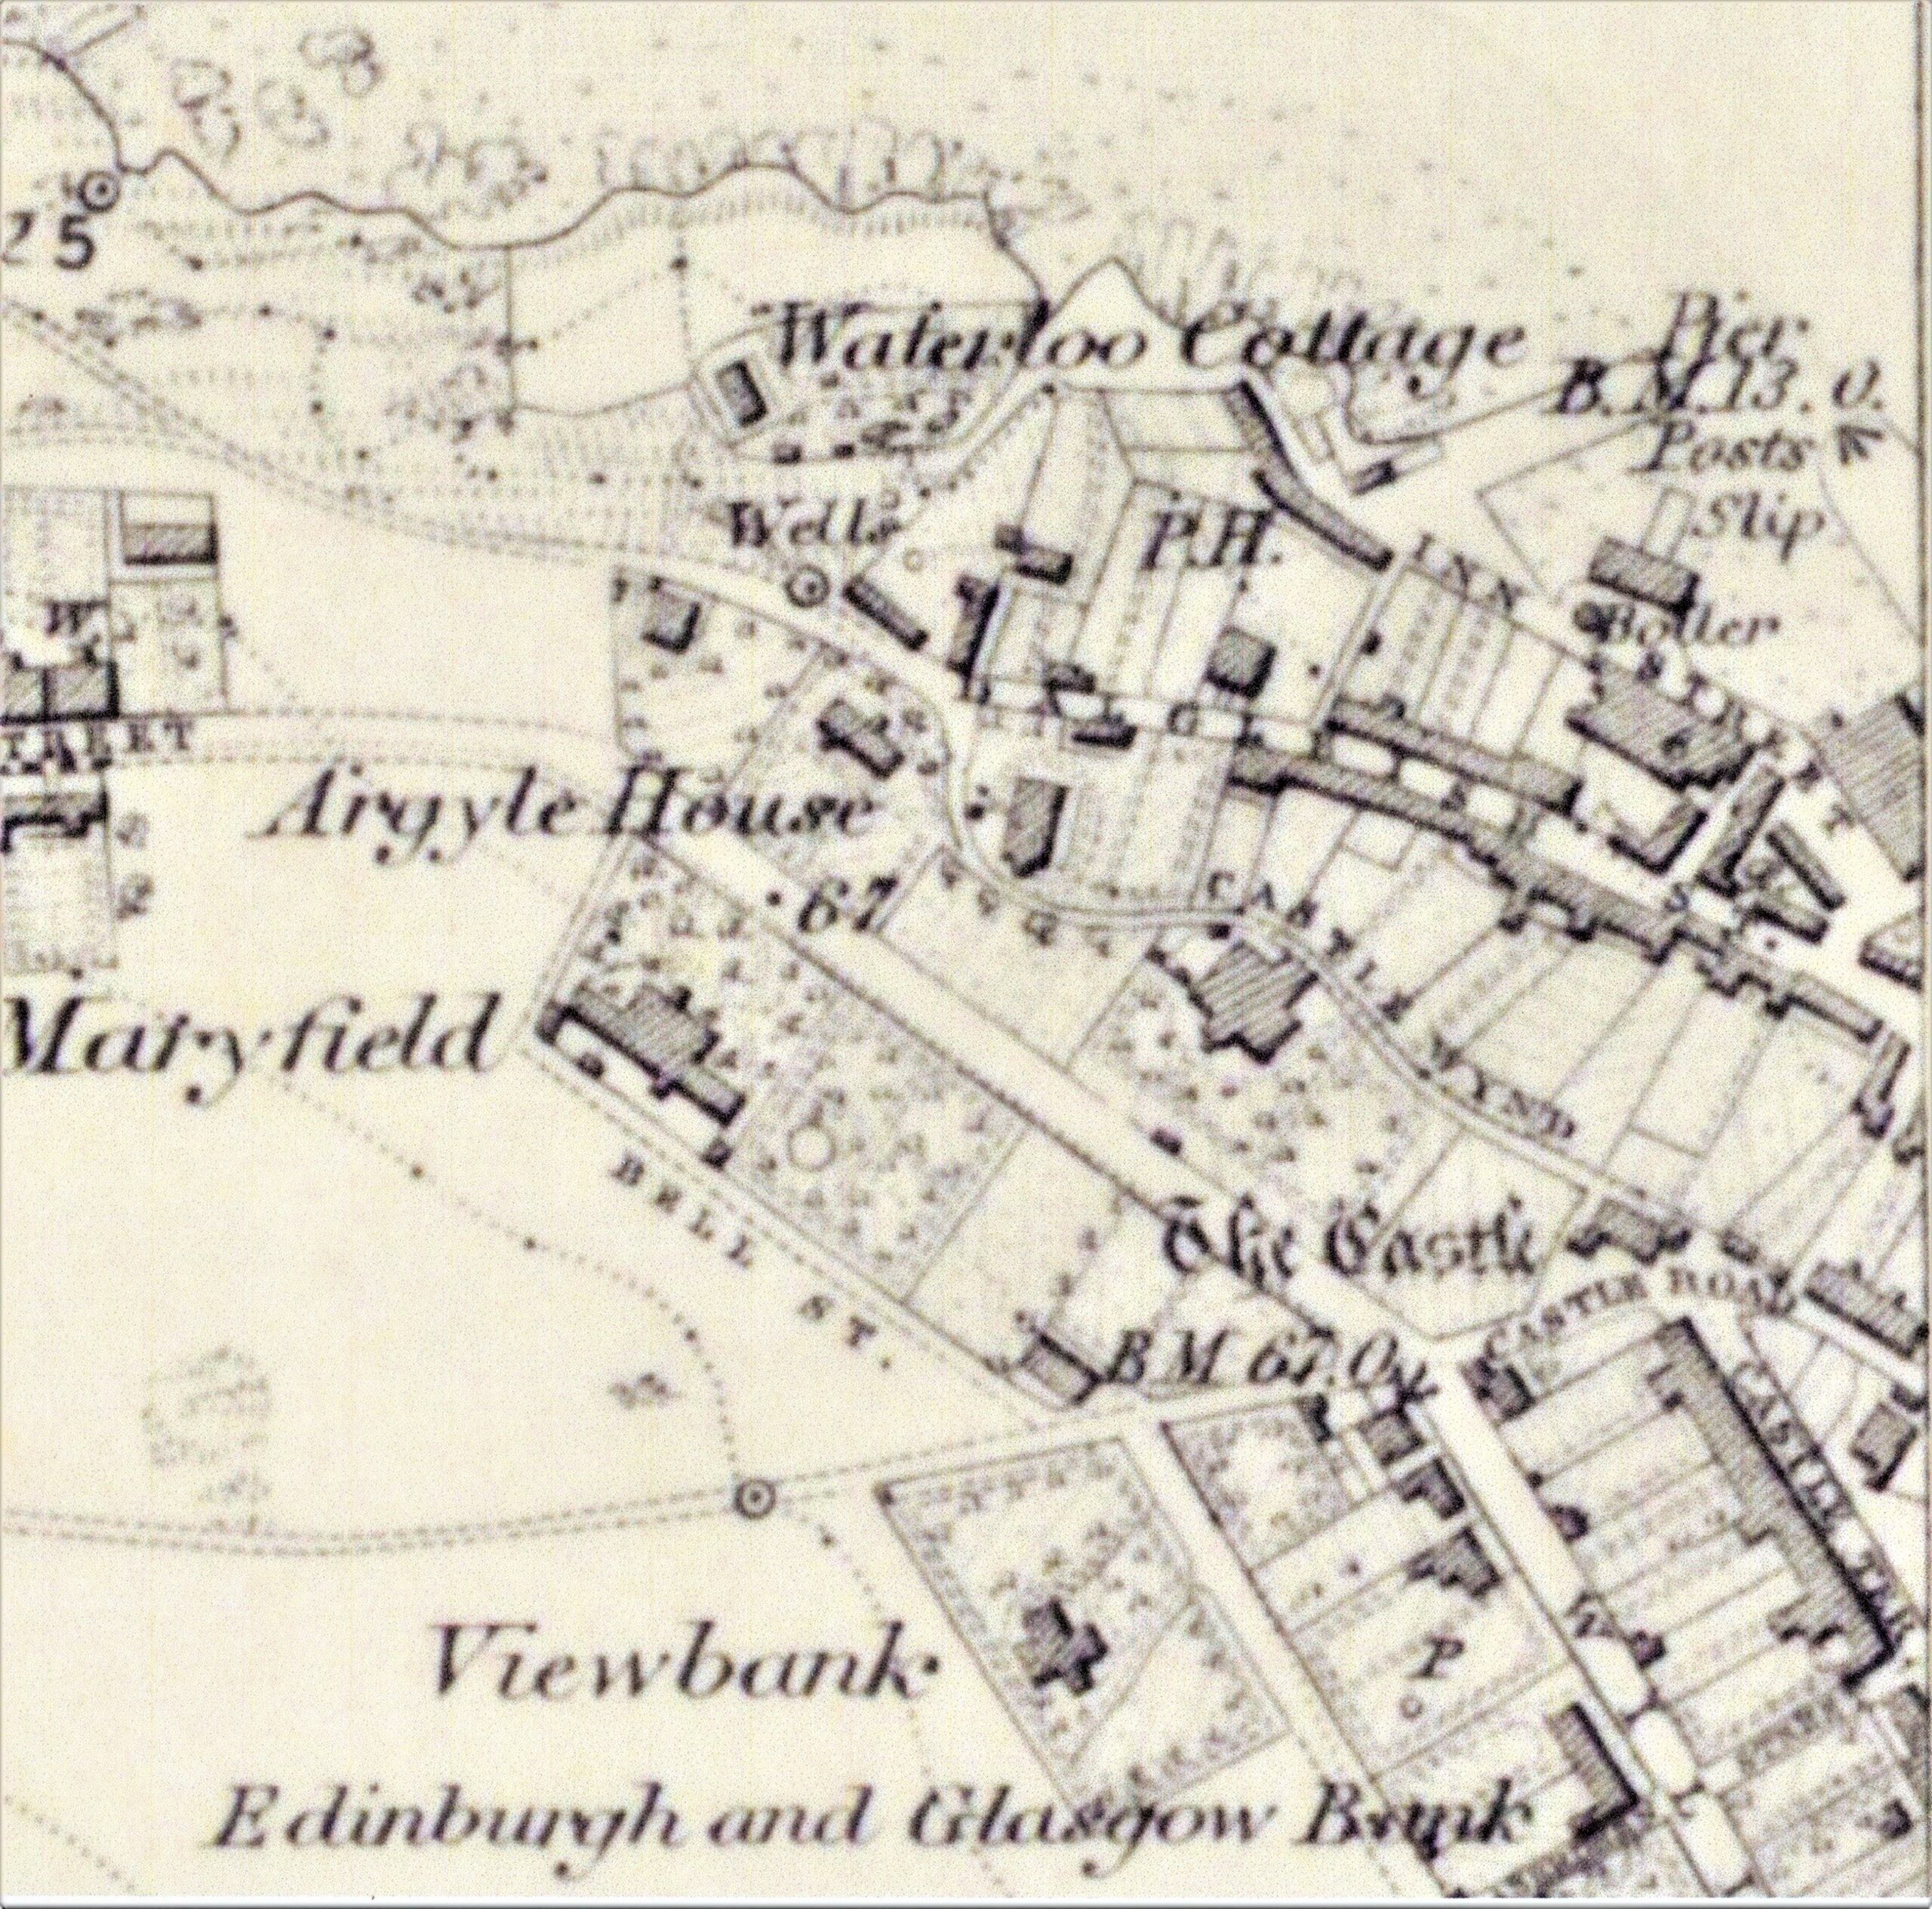 Tayport Heritage Trail - Board 5 - Extract OS map circa 1855 showing Castle Wynd which was later renamed Back Dykes